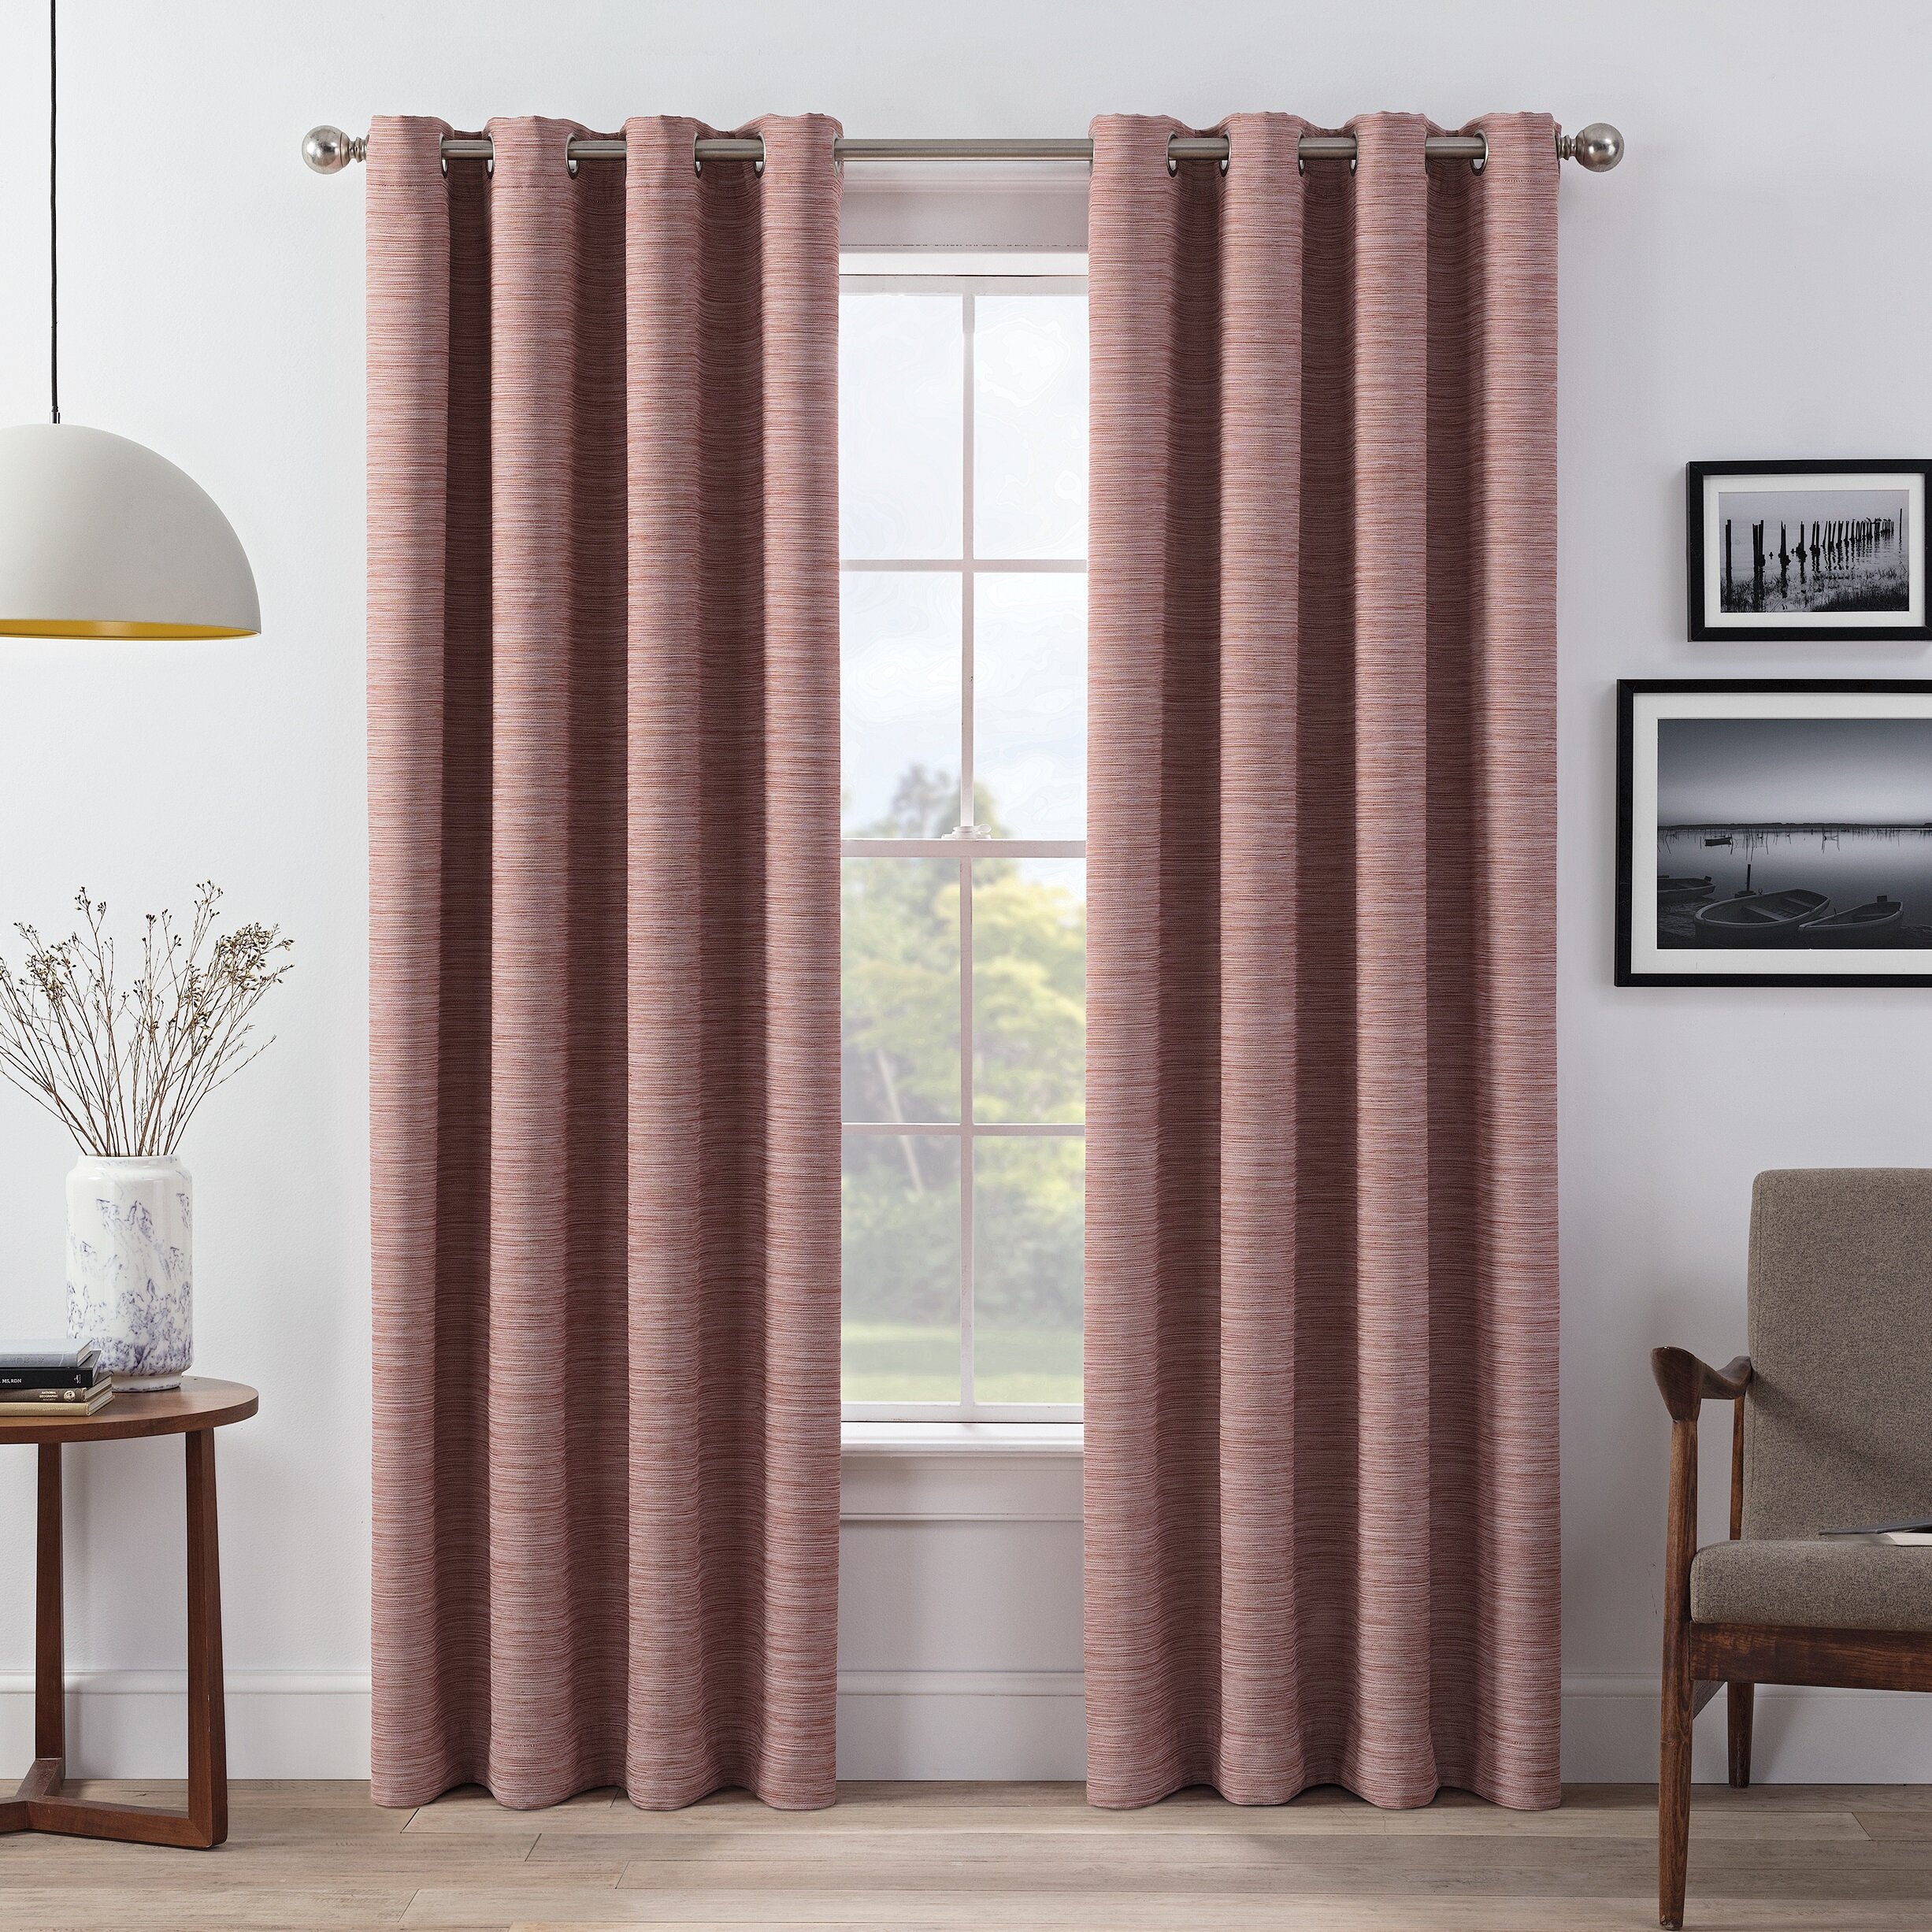 100% Blackout Panels Heavy Thick Grommet Bay Window Curtain 1 Set HOT PINK 